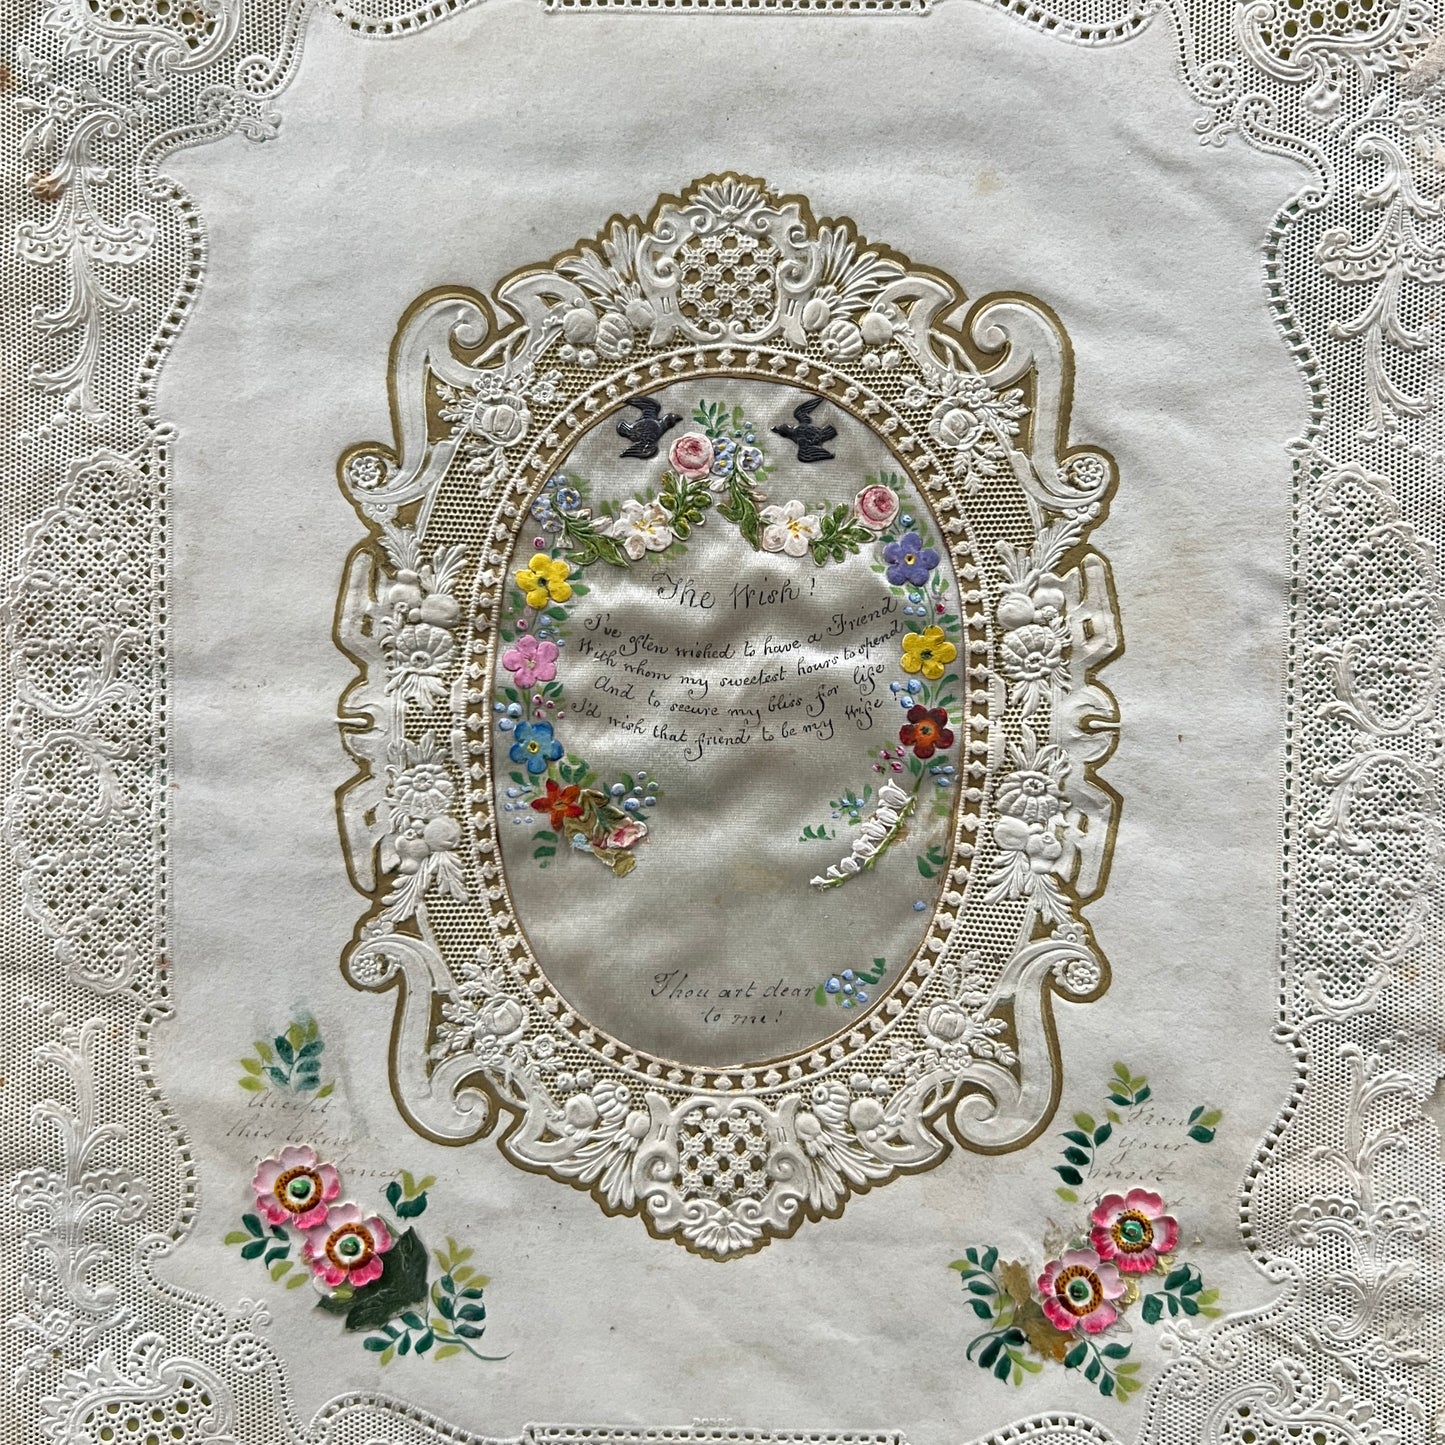 c. 1850s Large Embossed Lace Valentine Card with Hand-painted Flowers and Hand-written Poem